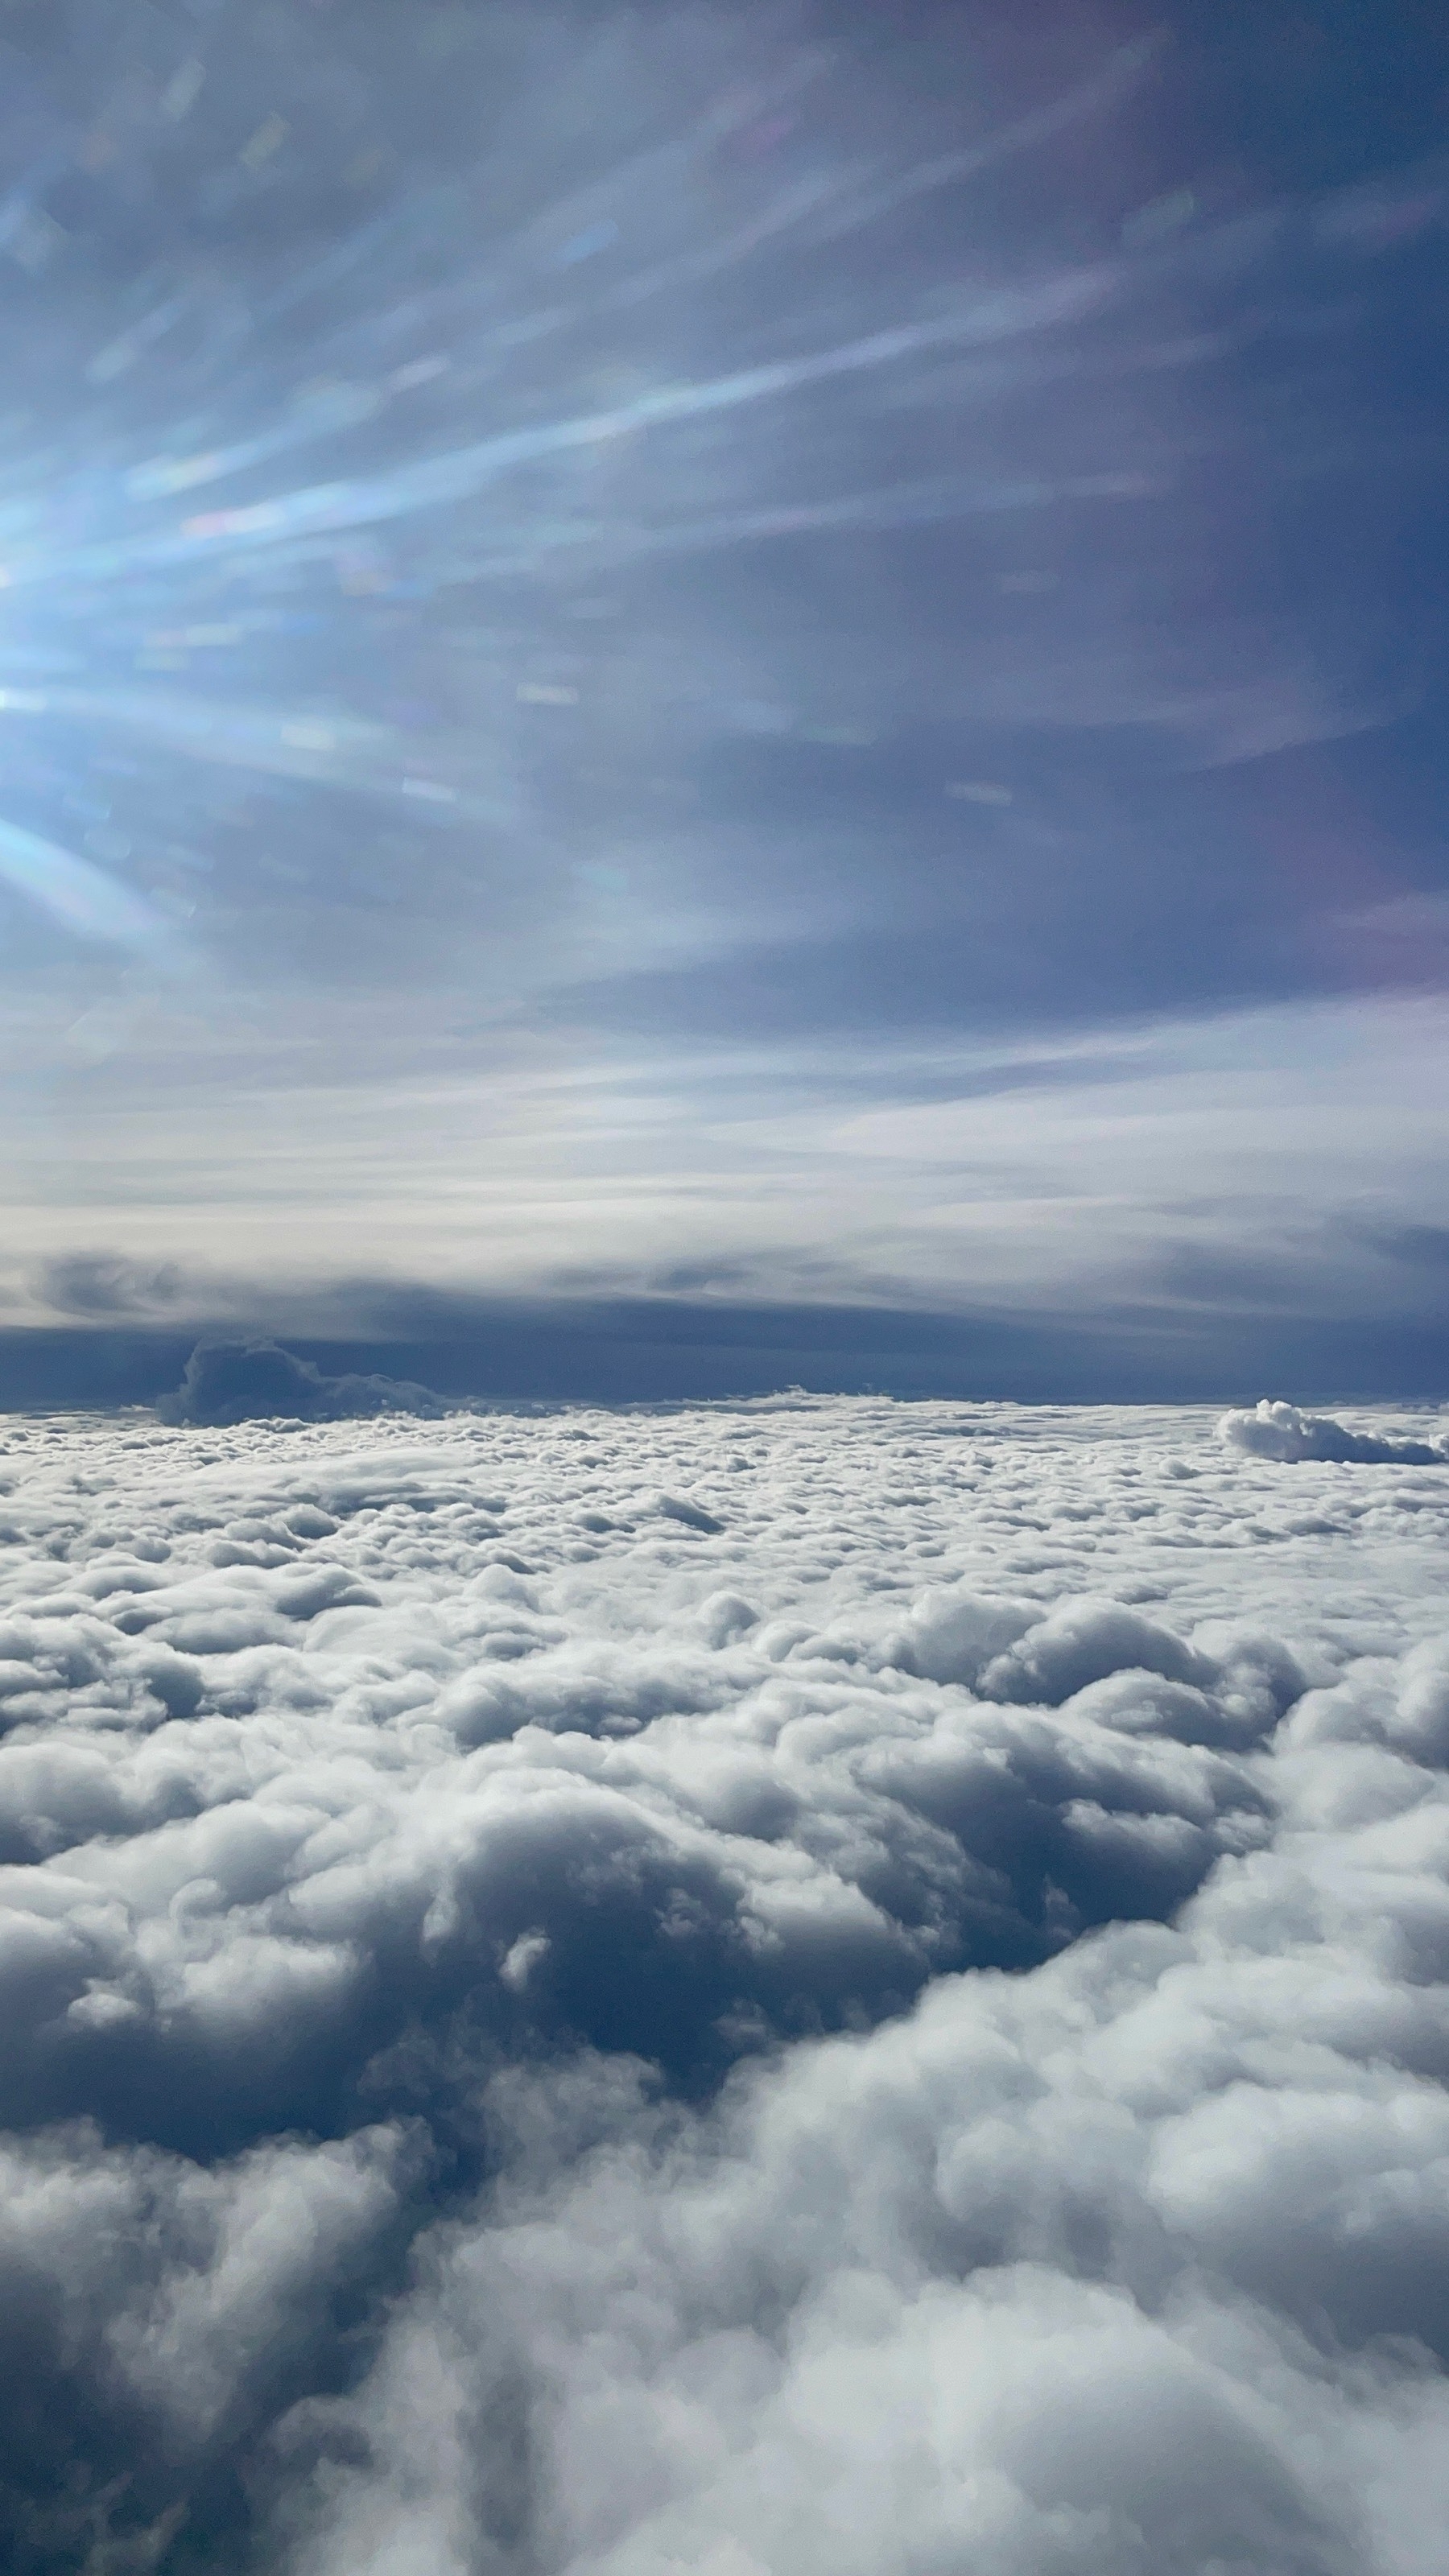 View outside a flight en route to Thailand from the Philippines. The glare of the sun is out of the frame, but its light shines brightly on the fluffy sea of clouds, further defining their shape. The sky above the clouds is a calming type of blue, reinforcing how serene the heavens look.